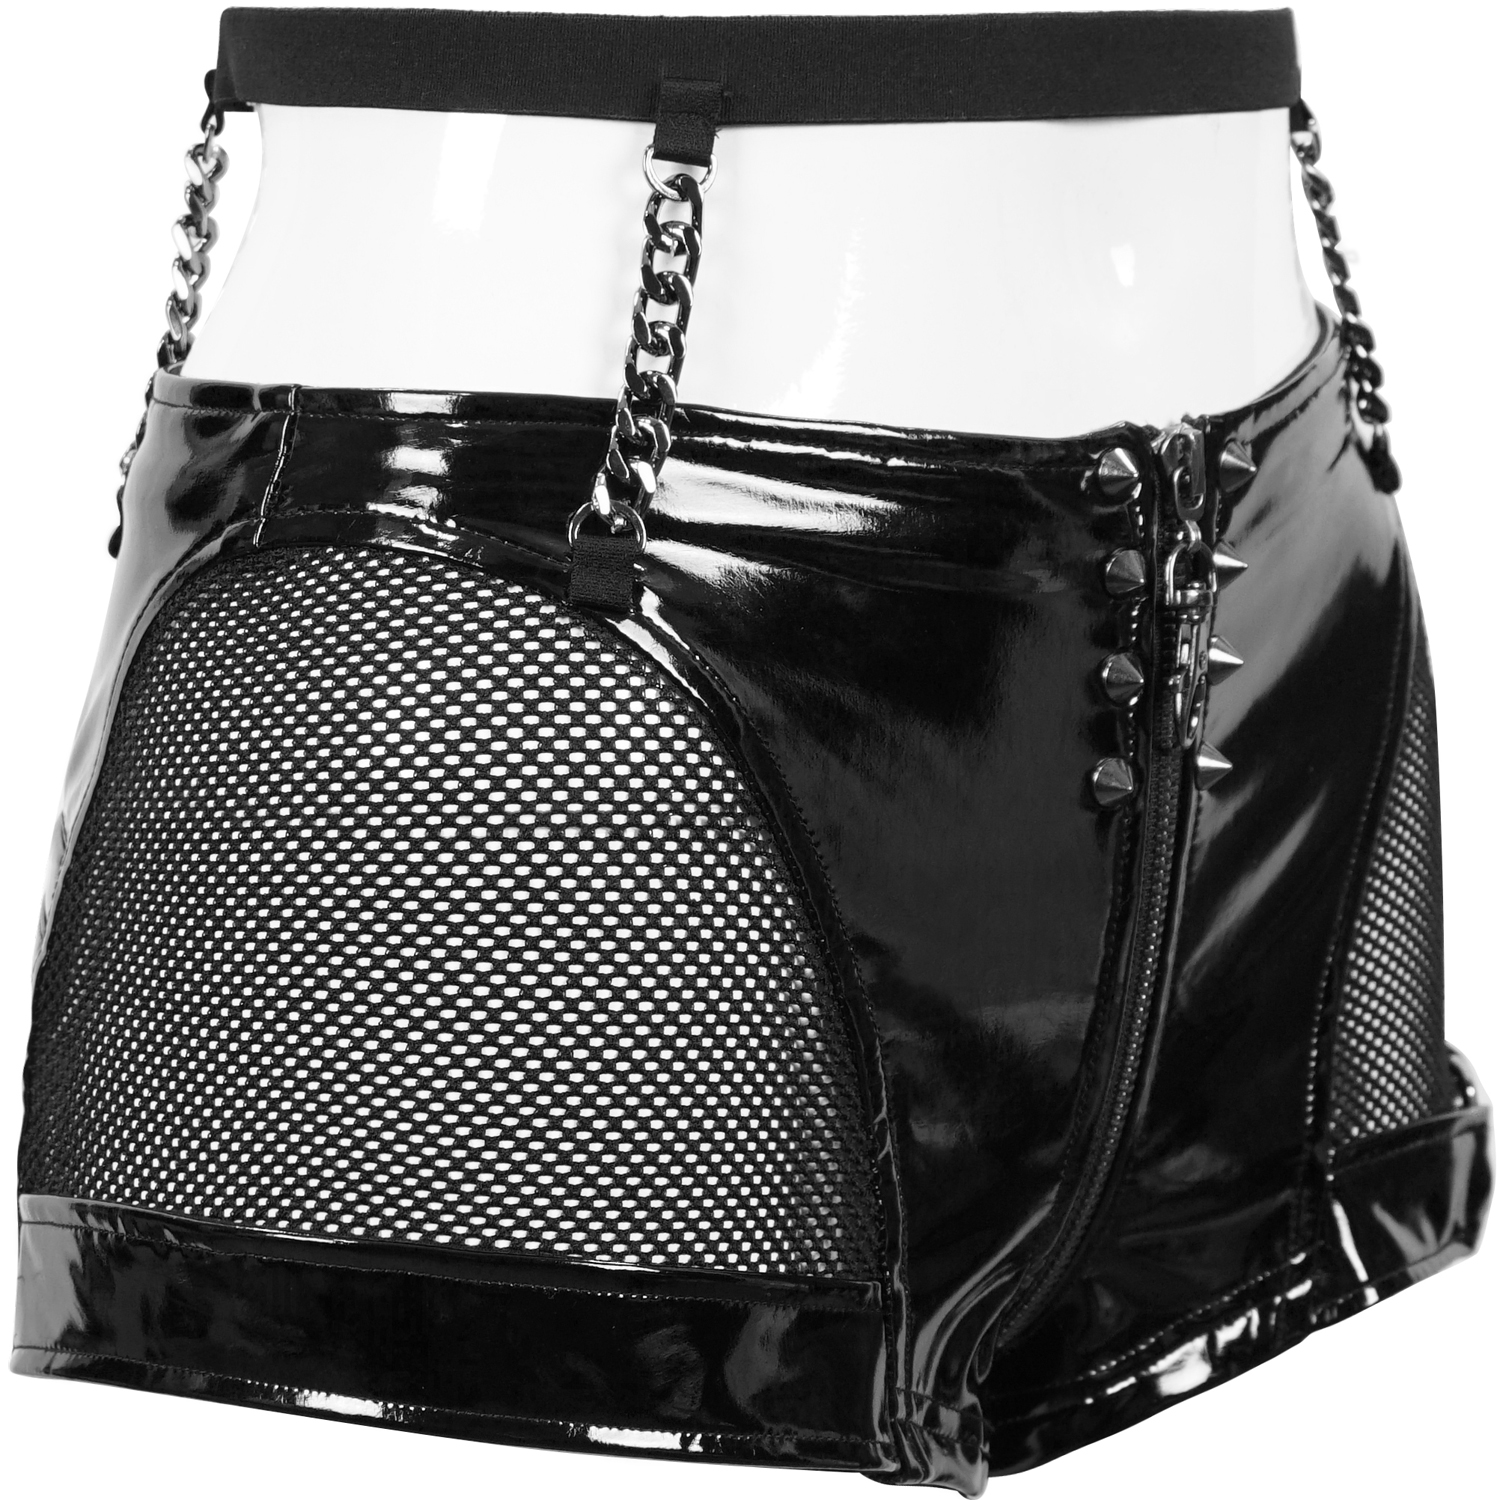 Sexy Black Faux Leather Shorts by Devil Fashion • the dark store™